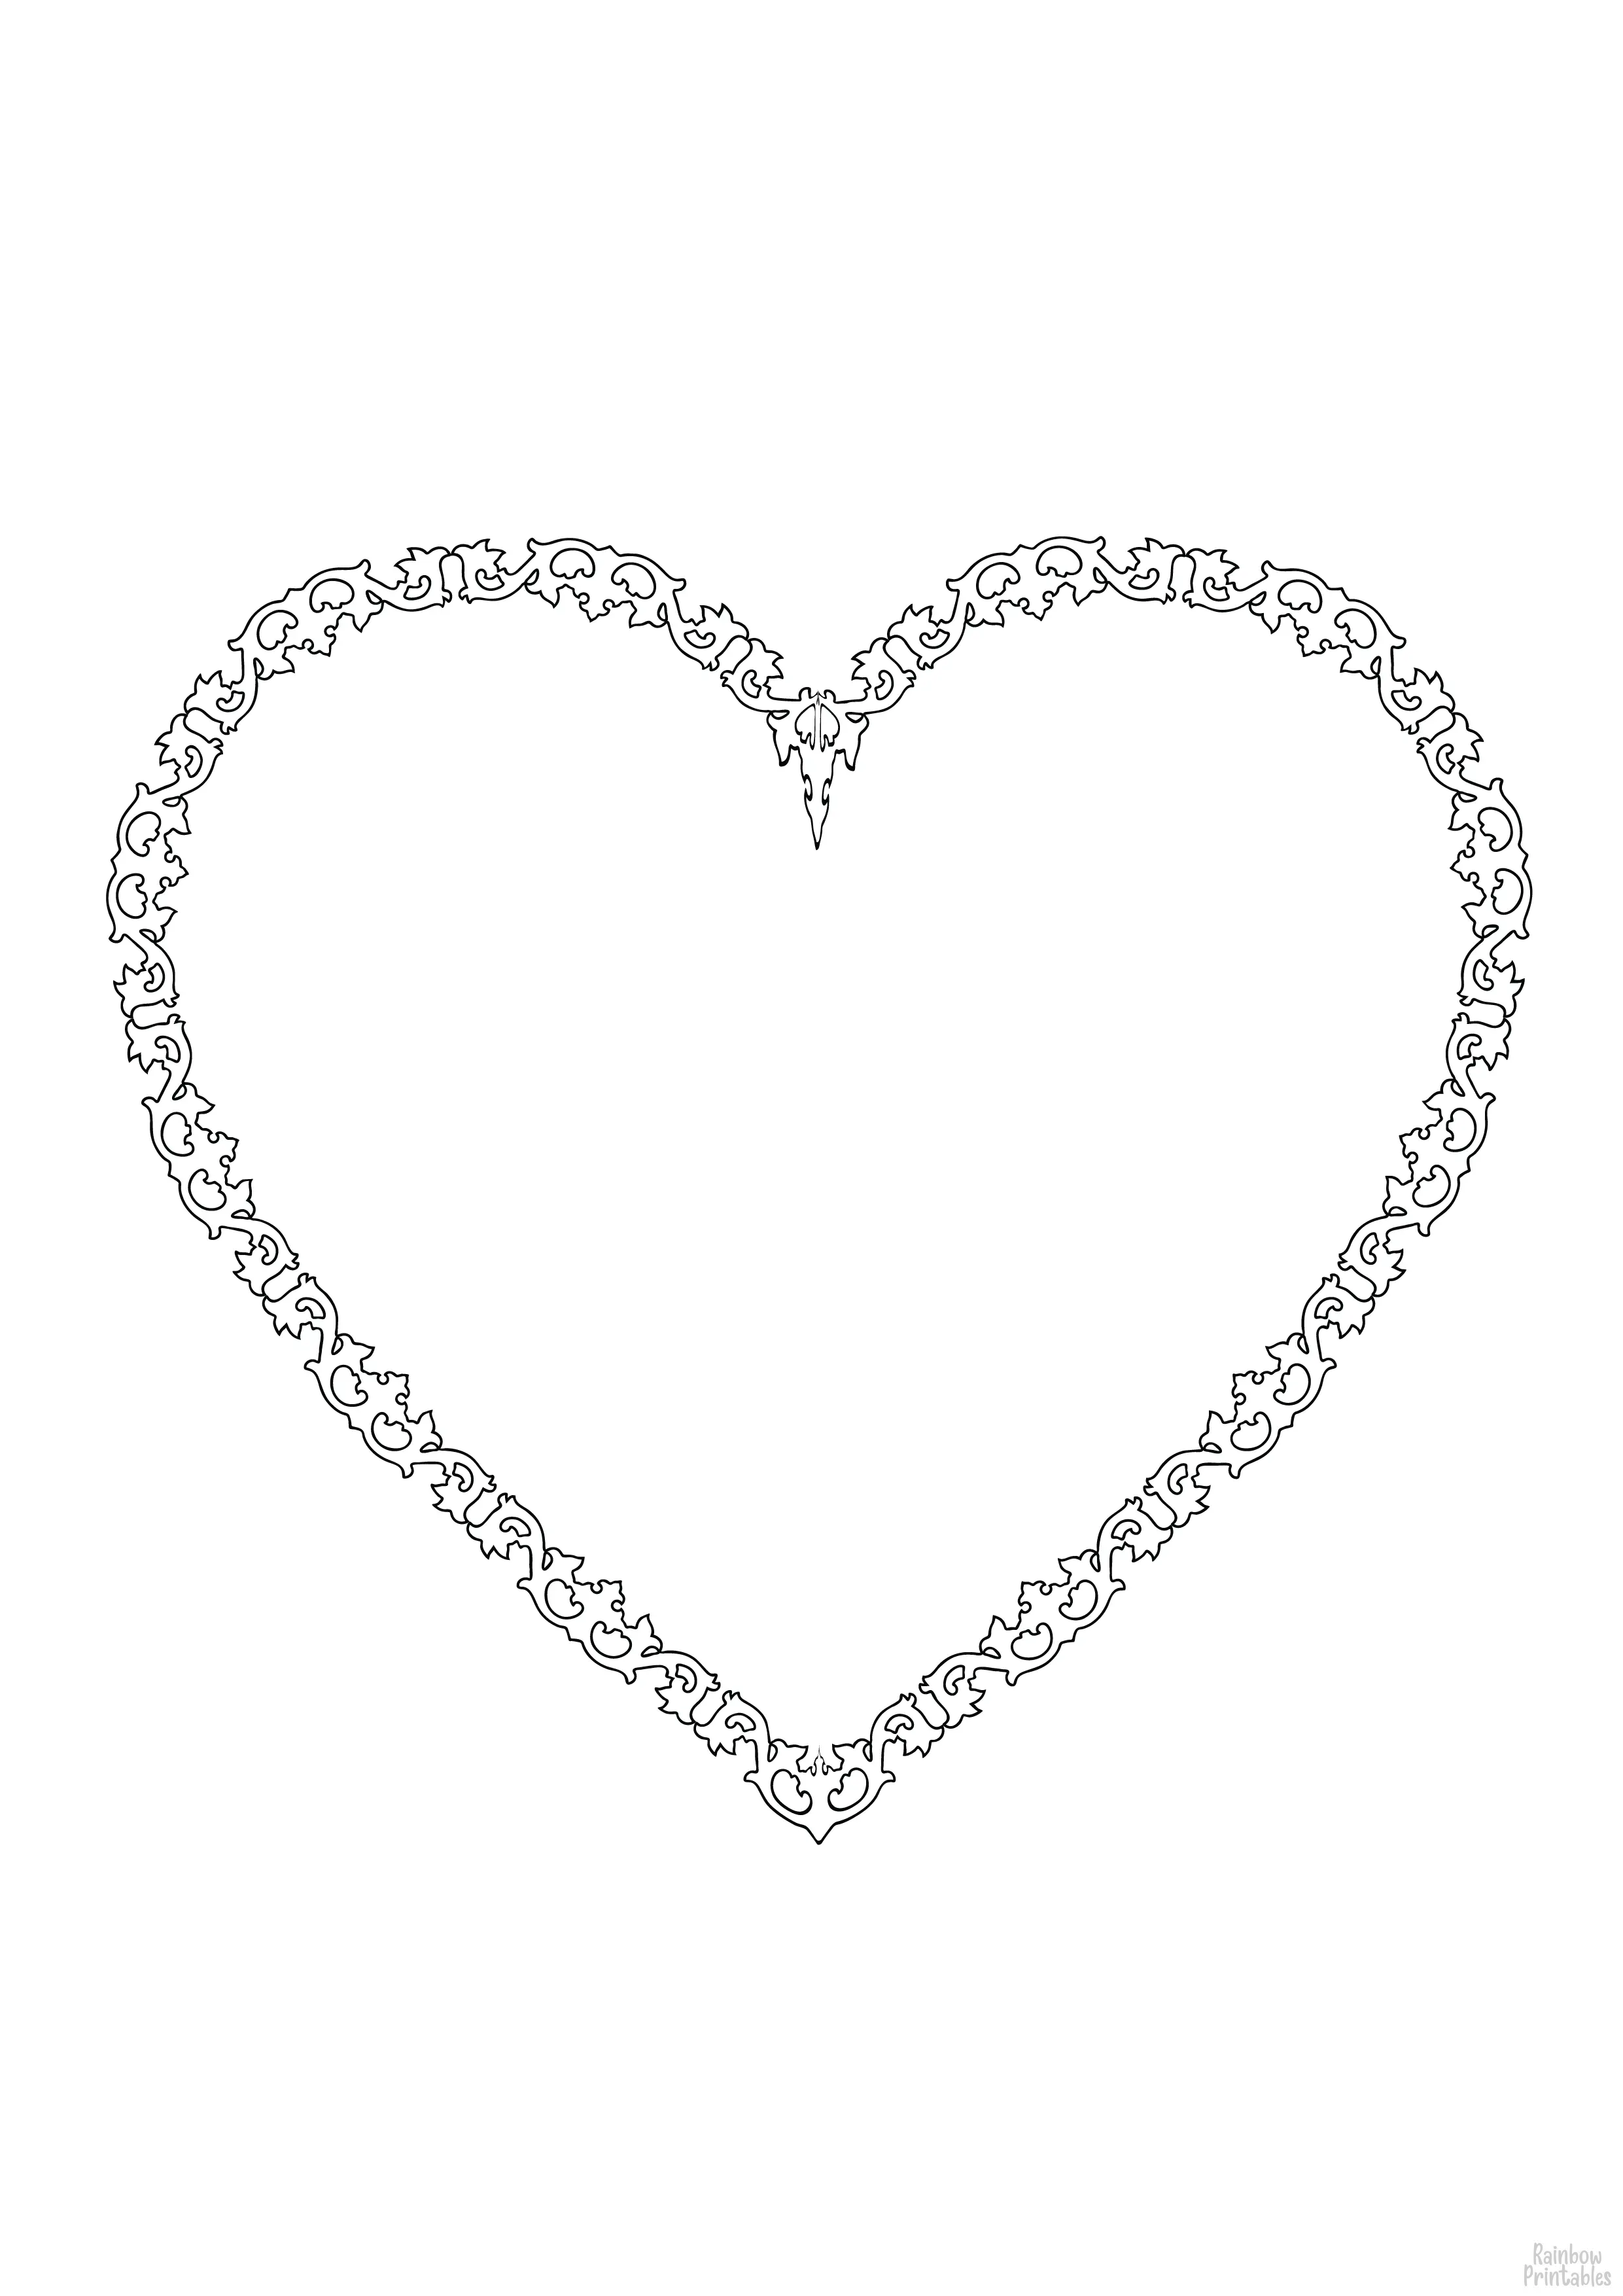 Valentine DAY PAGE FRAMES HEART SHAPE Clipart Coloring Pages for Kids Adults Art Activities Line Art-04